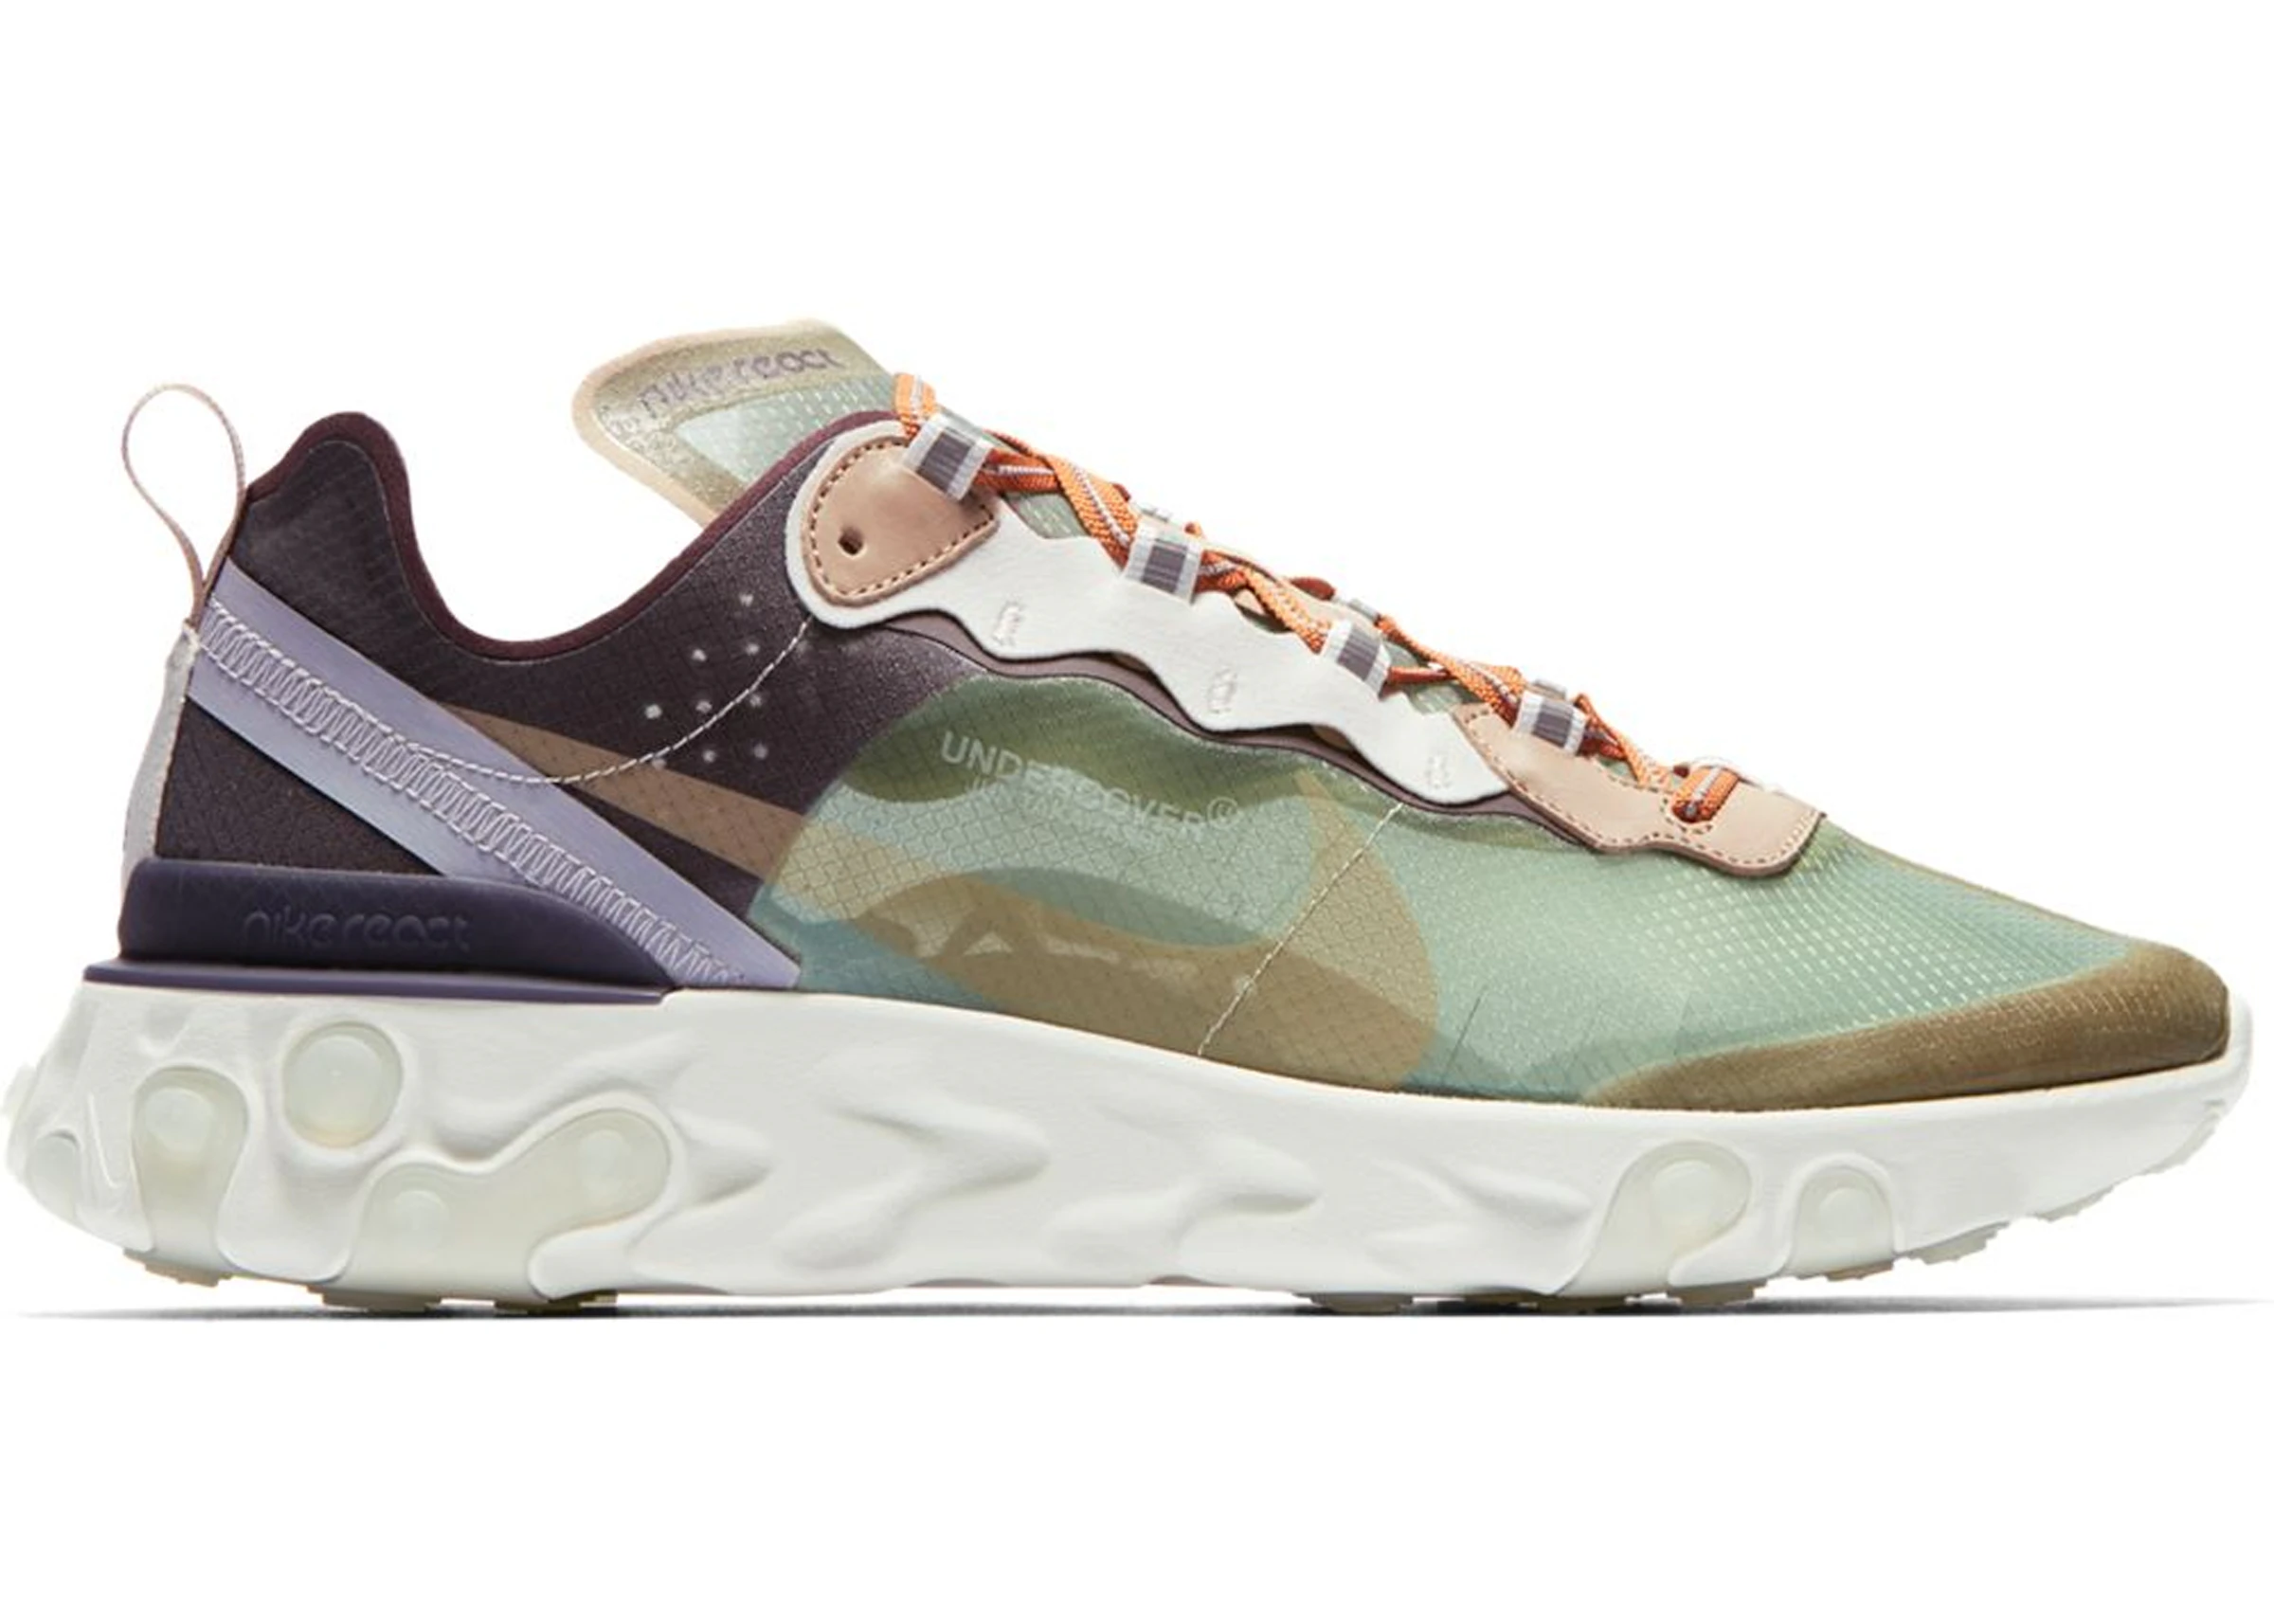 Dew gain Blossom Buy Nike React Element Shoes & New Sneakers - StockX